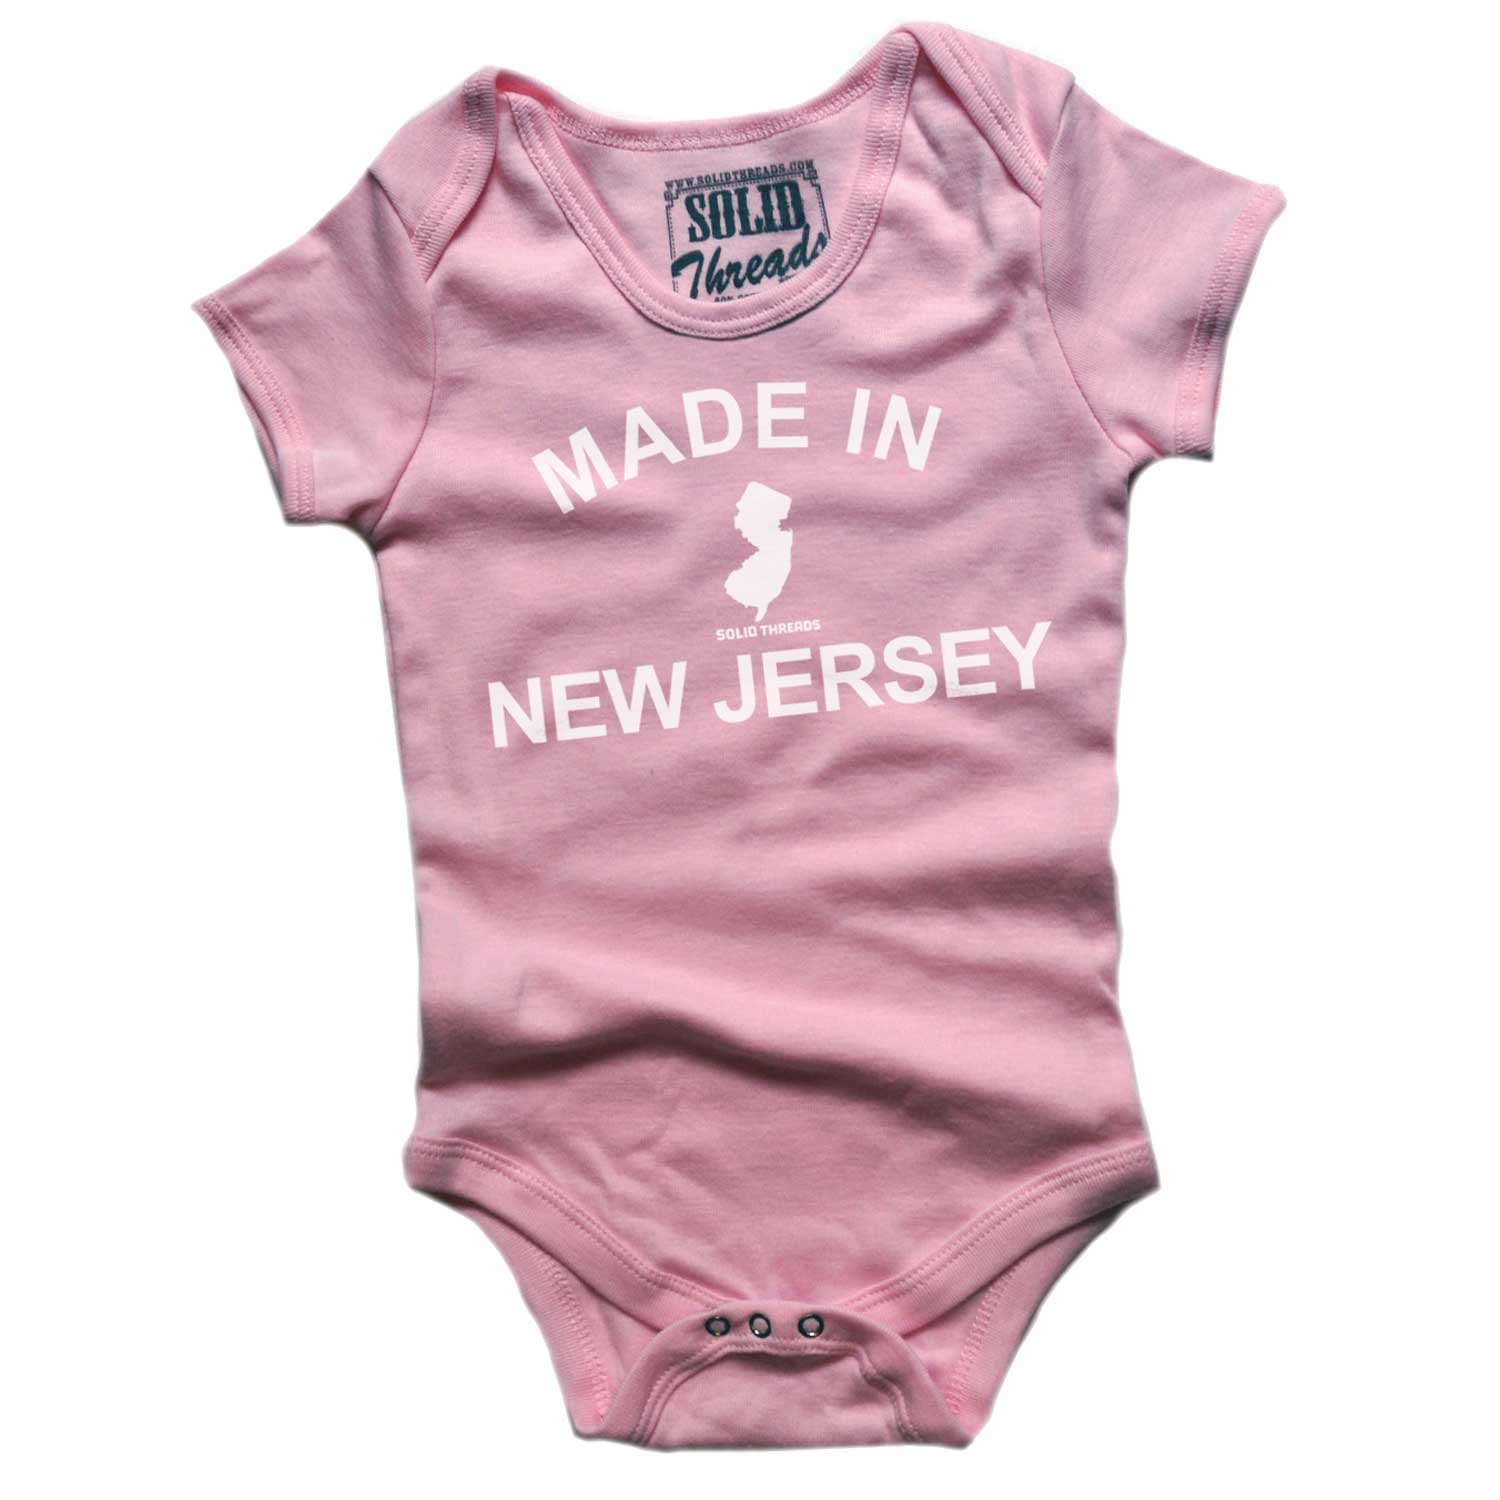 Baby Made In New Jersey Cool Graphic One Piece | Retro Garden State Pink Romper | Solid Threads